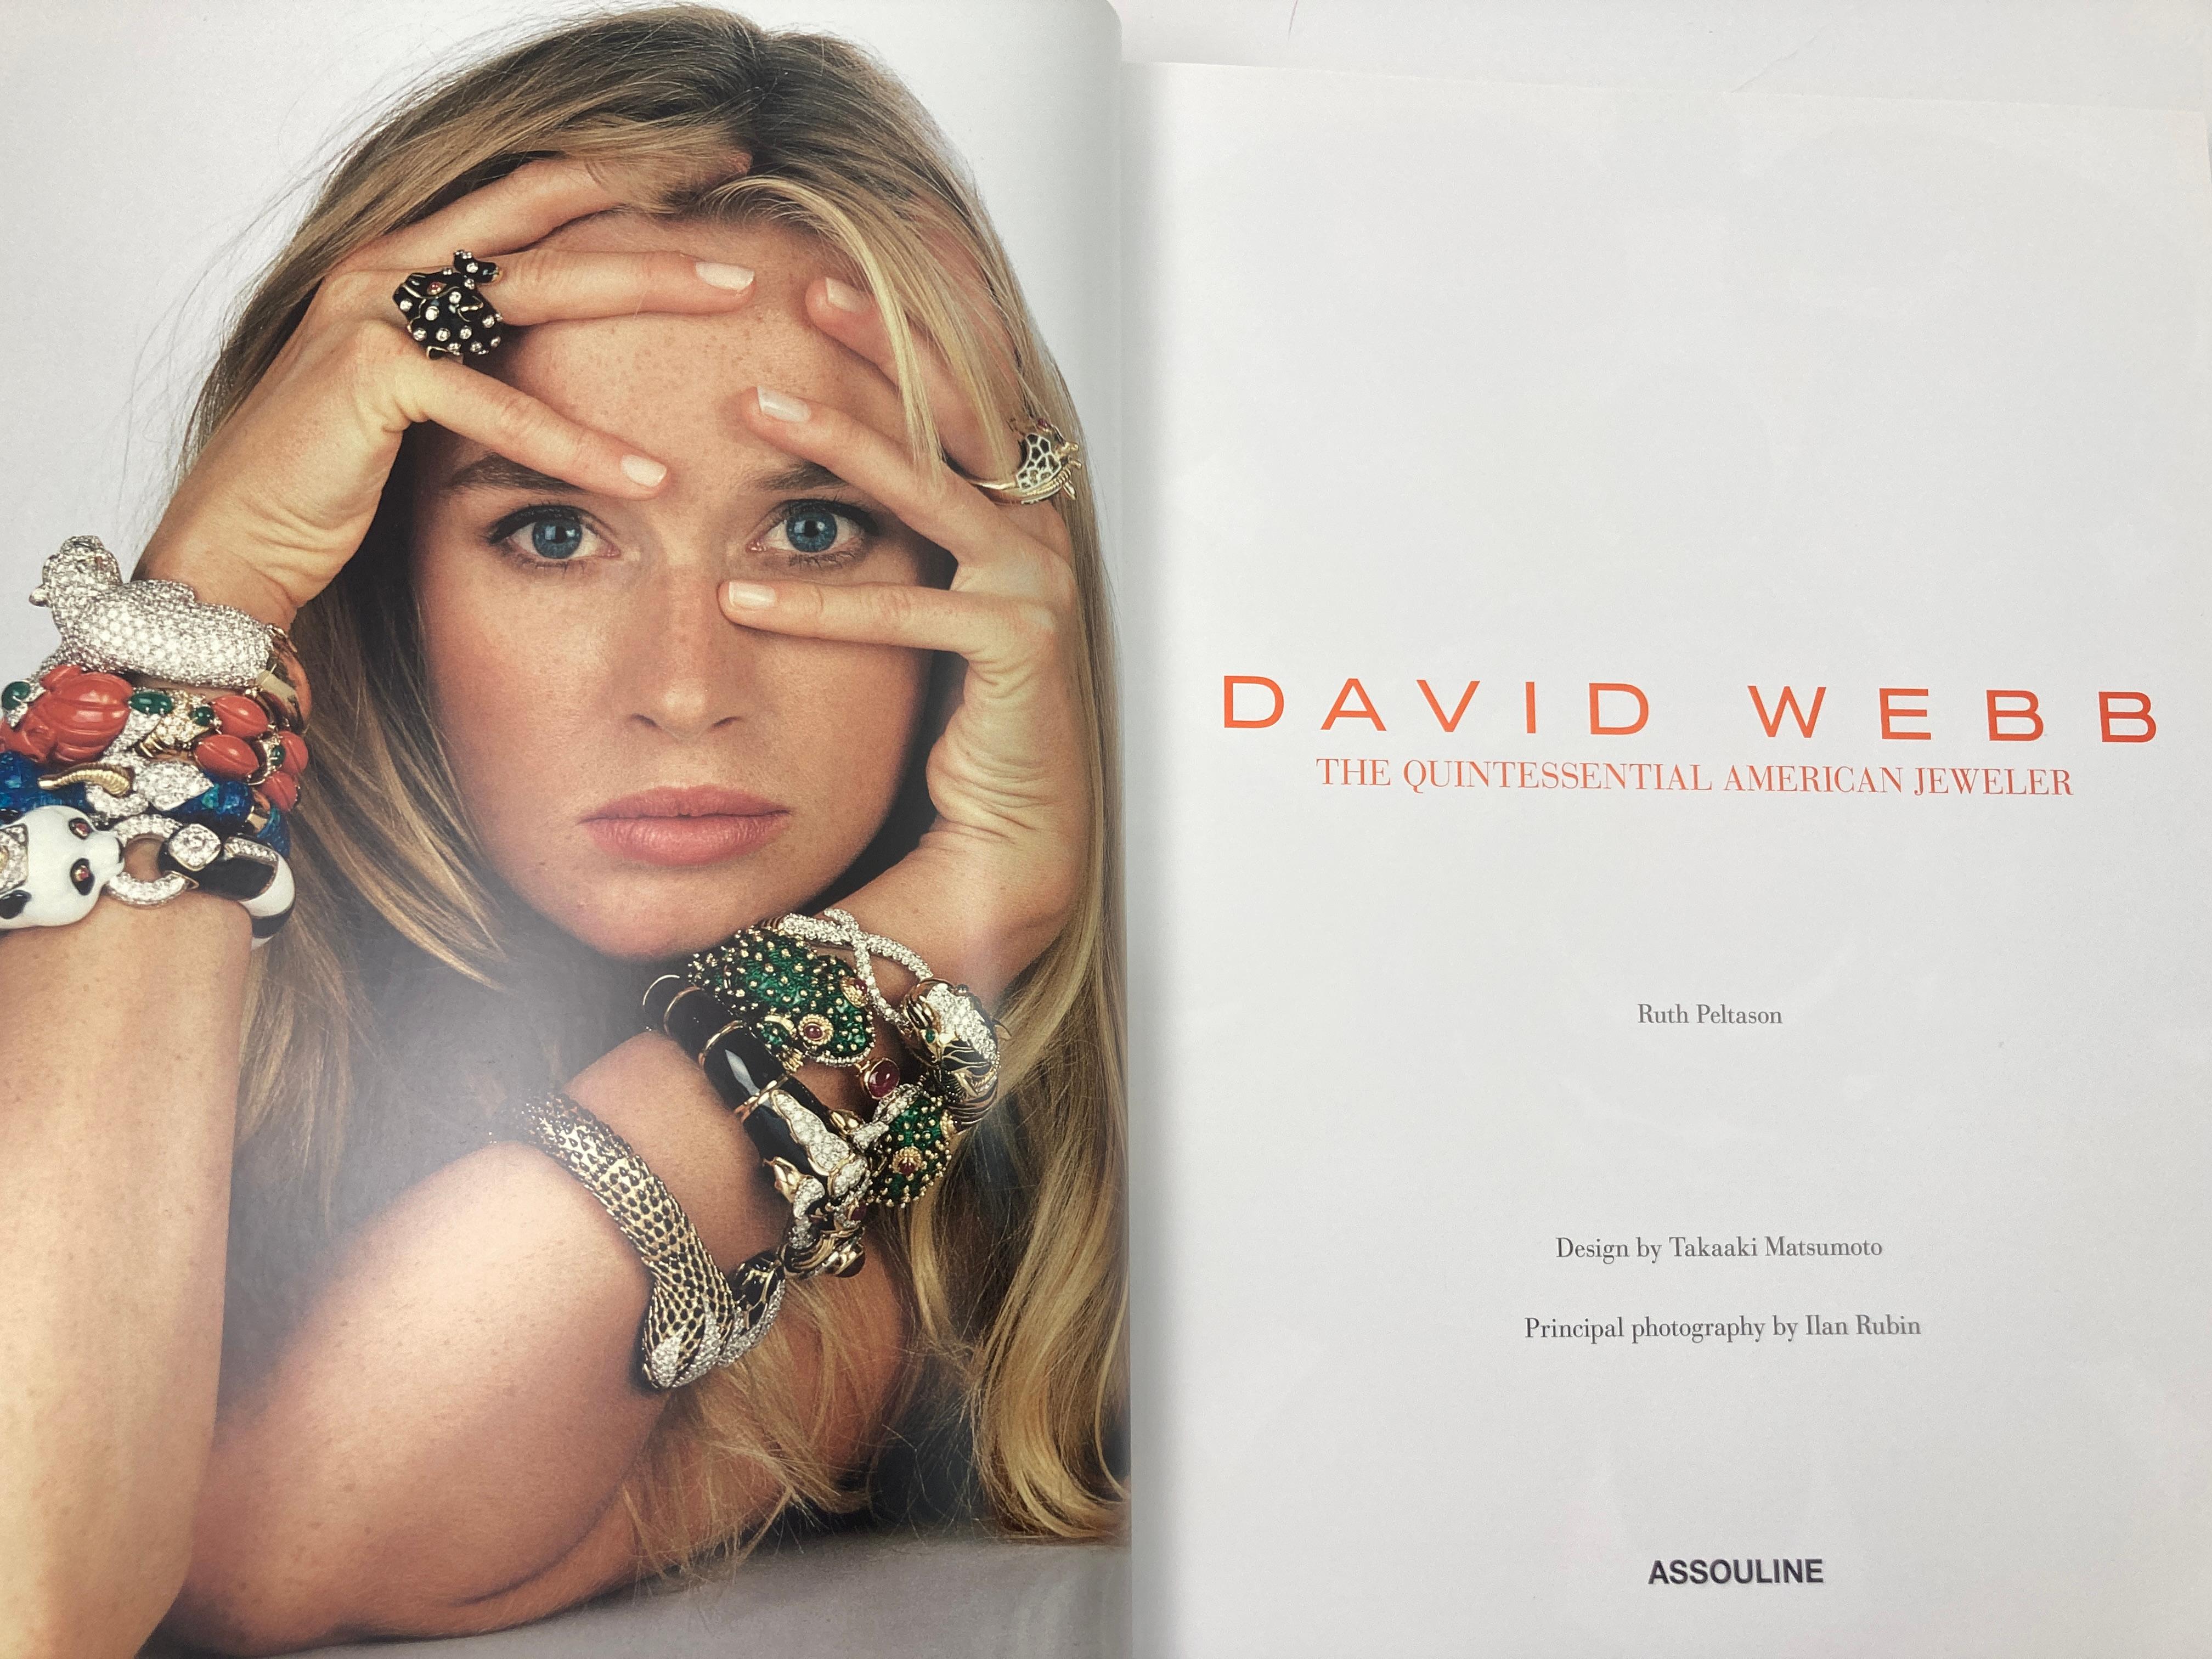 David Webb The Quintessential American Jeweler Hardcover Book by Ruth Peltason For Sale 5